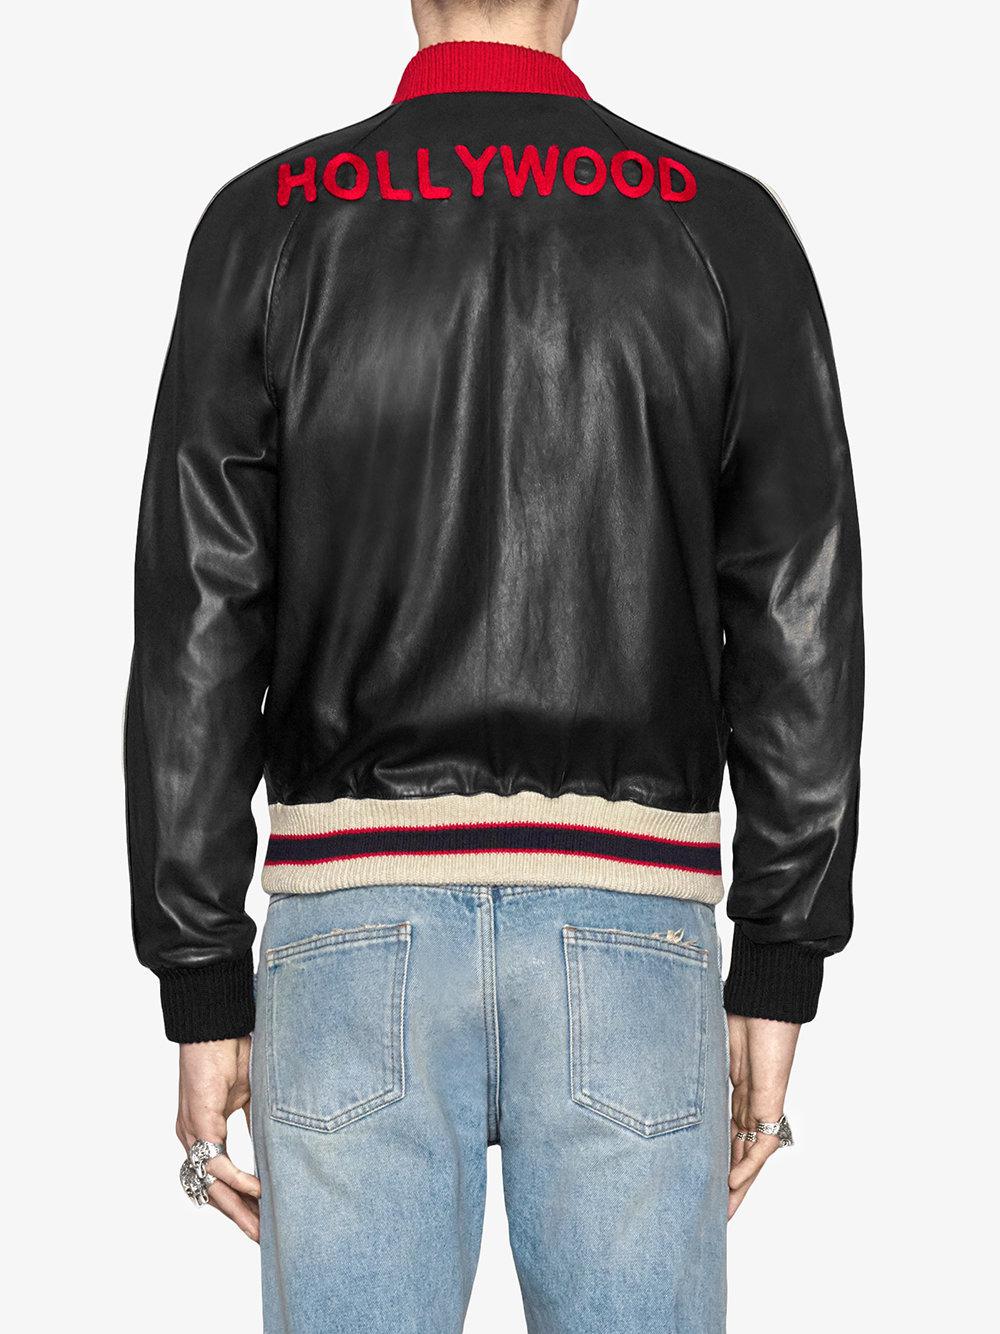 gucci mens leather bomber jacket